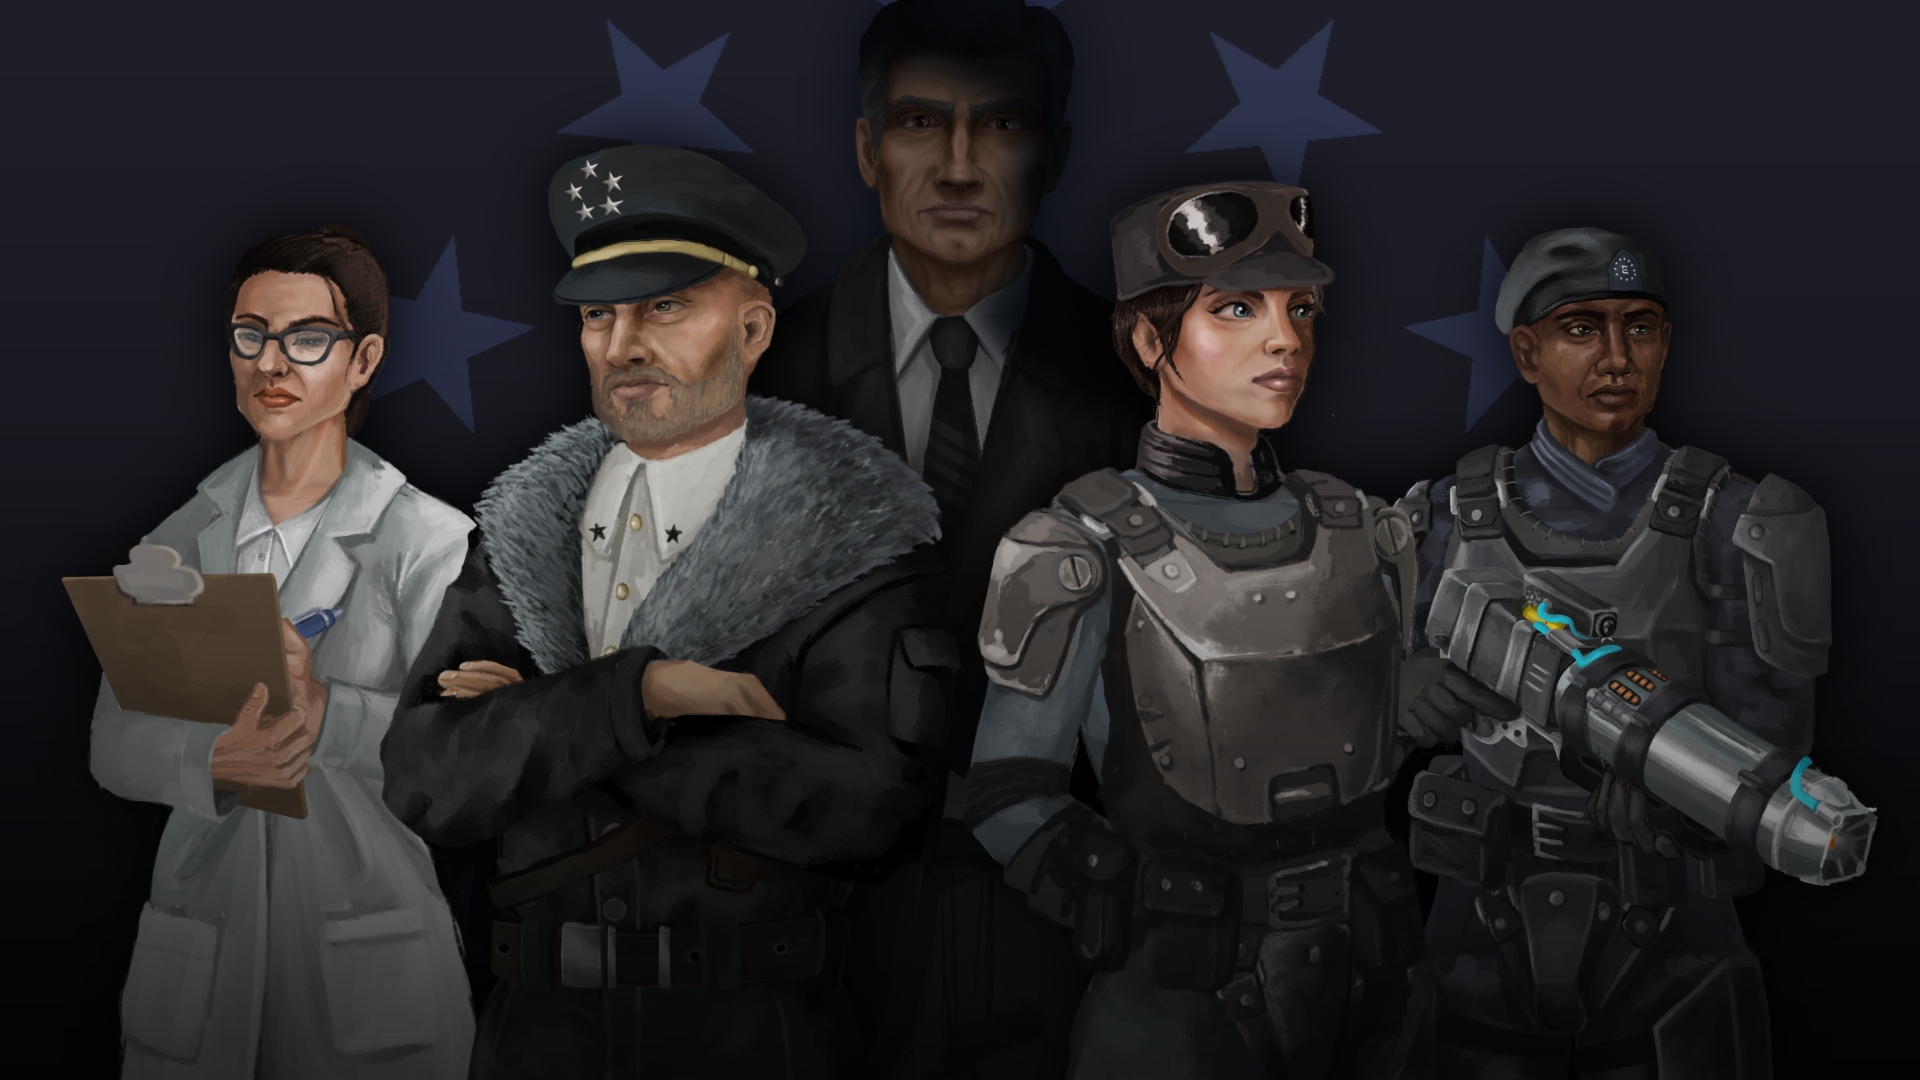 America Rising 2 – Legacy of the Enclave out now!